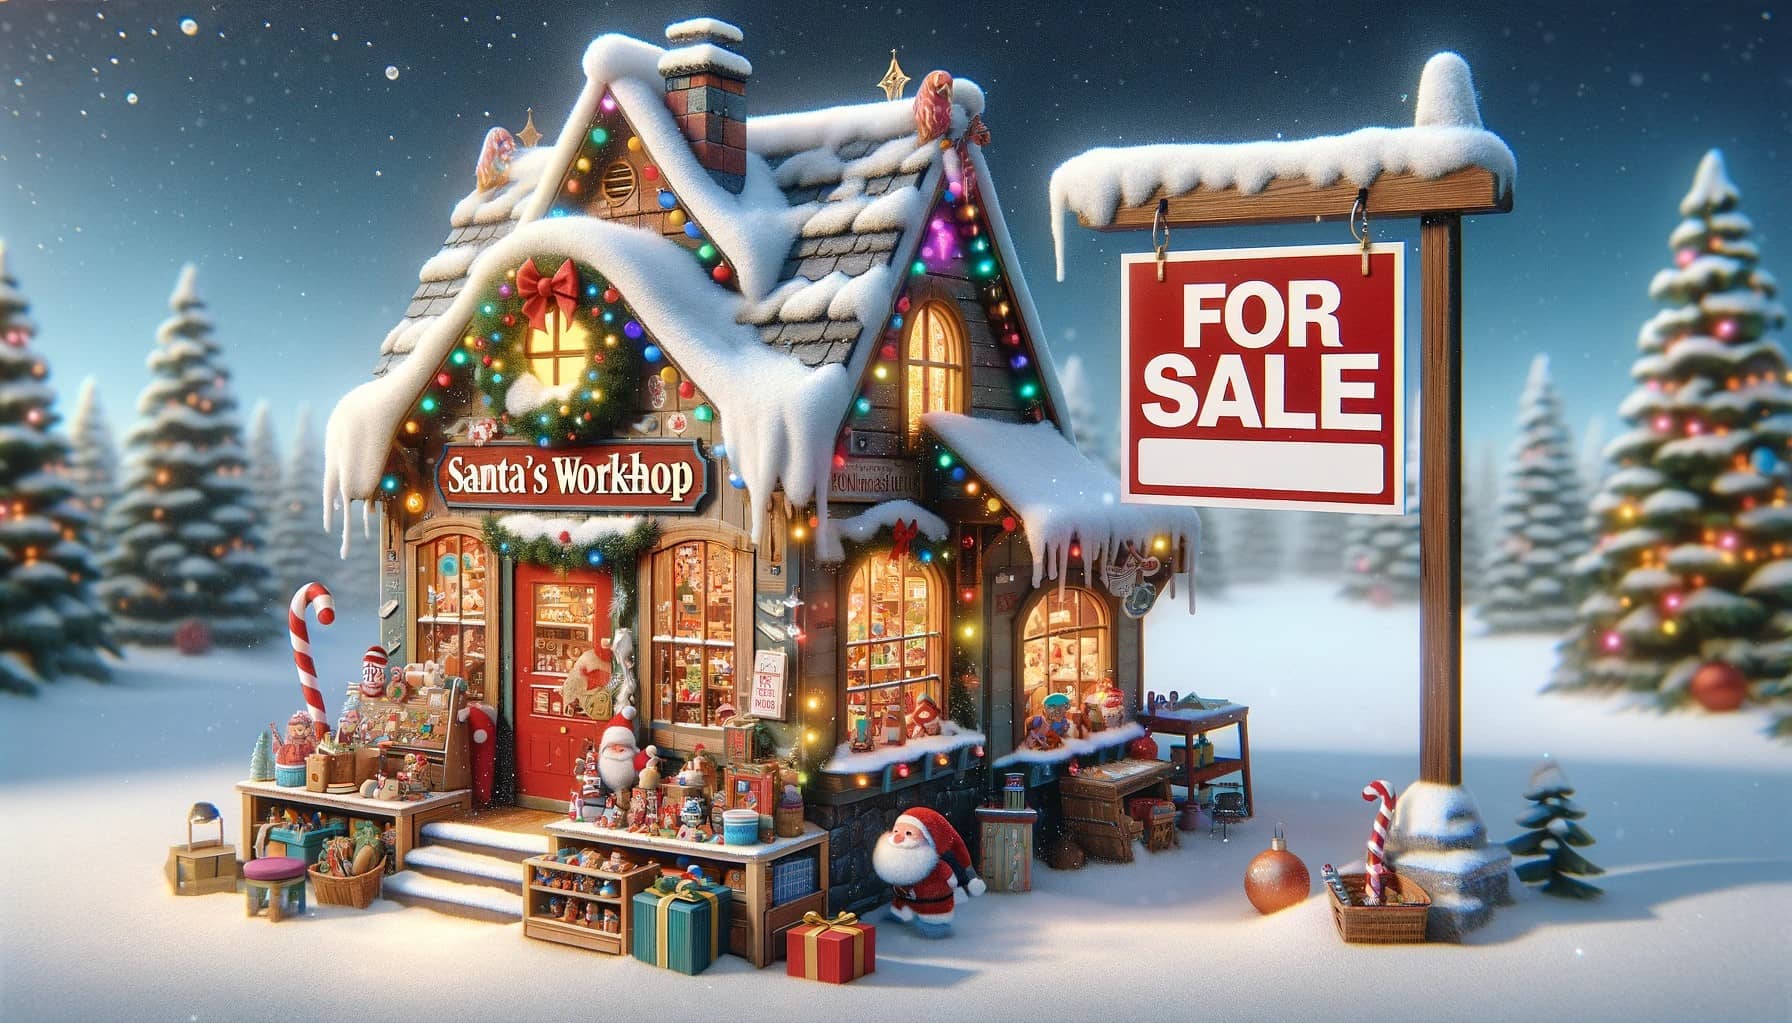 Art depicting Santa's Workshop with a "For Sale" depicting how to sell a home during the holidays in san francisco